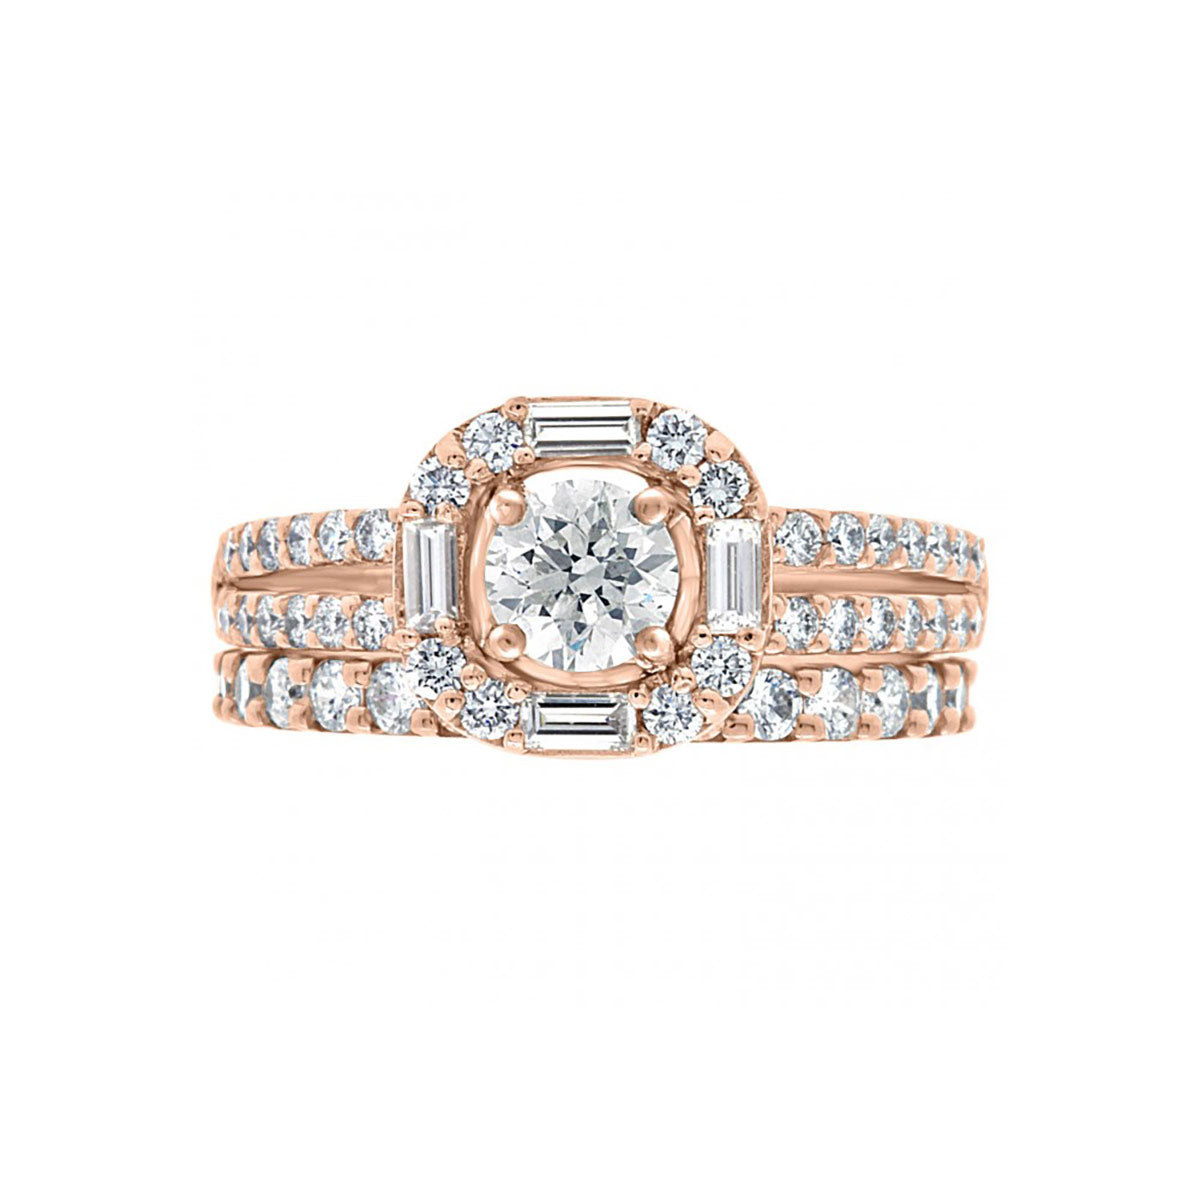 Baguette and Round Diamond Engagement Ring in rose gold pictured with a matching diamond wedding ring